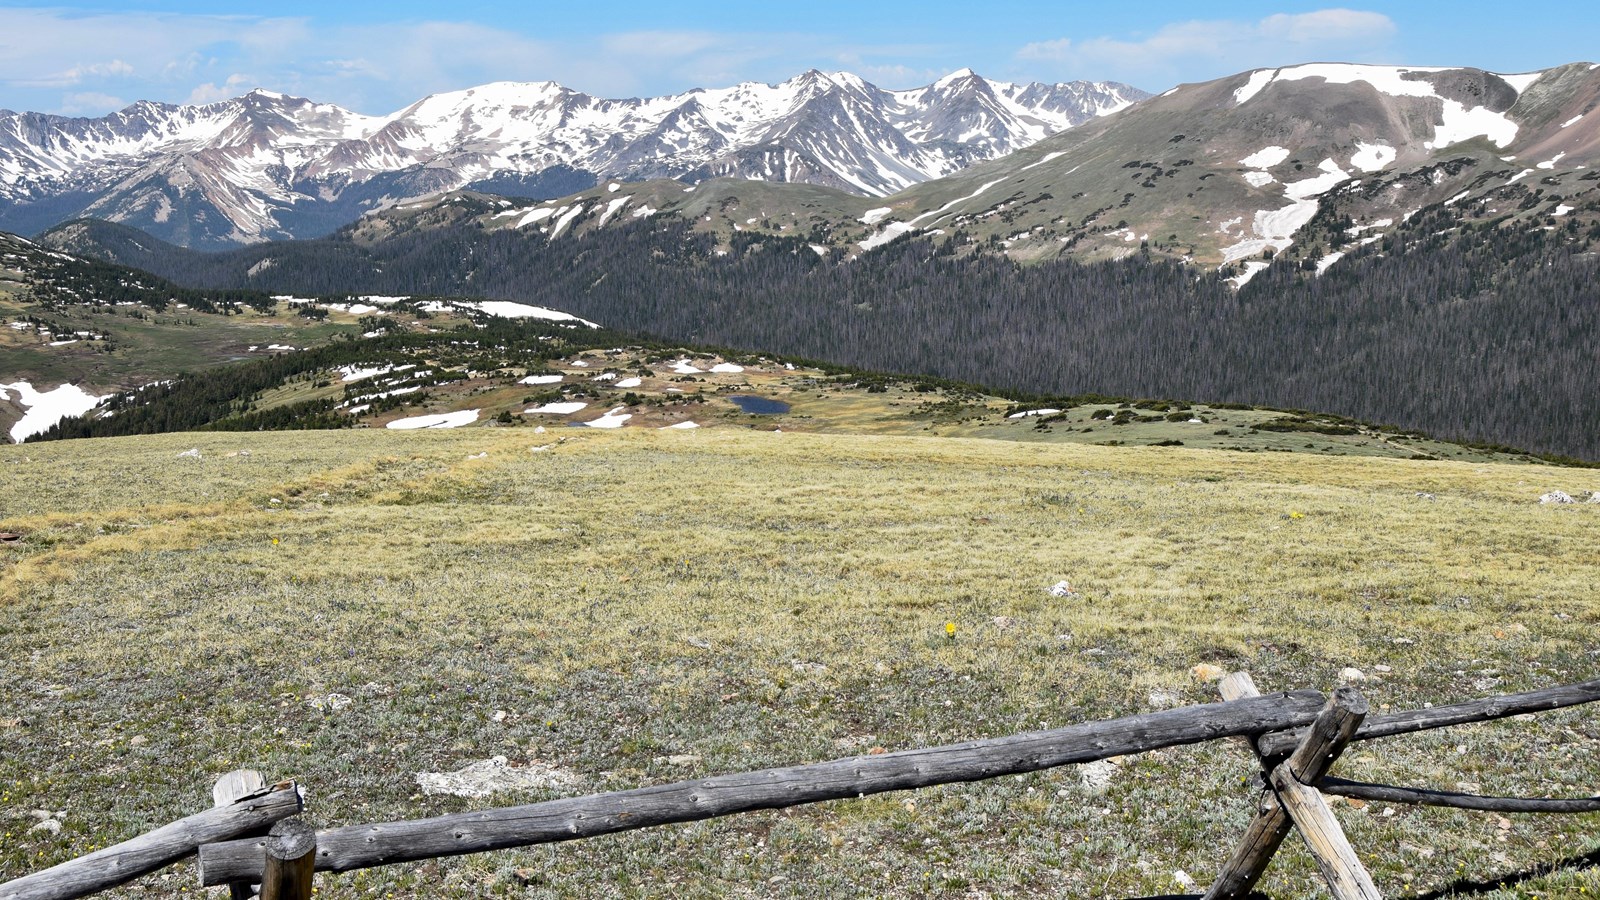 a fence in the foreground, grassy meadow and snow capped mountains in the distance